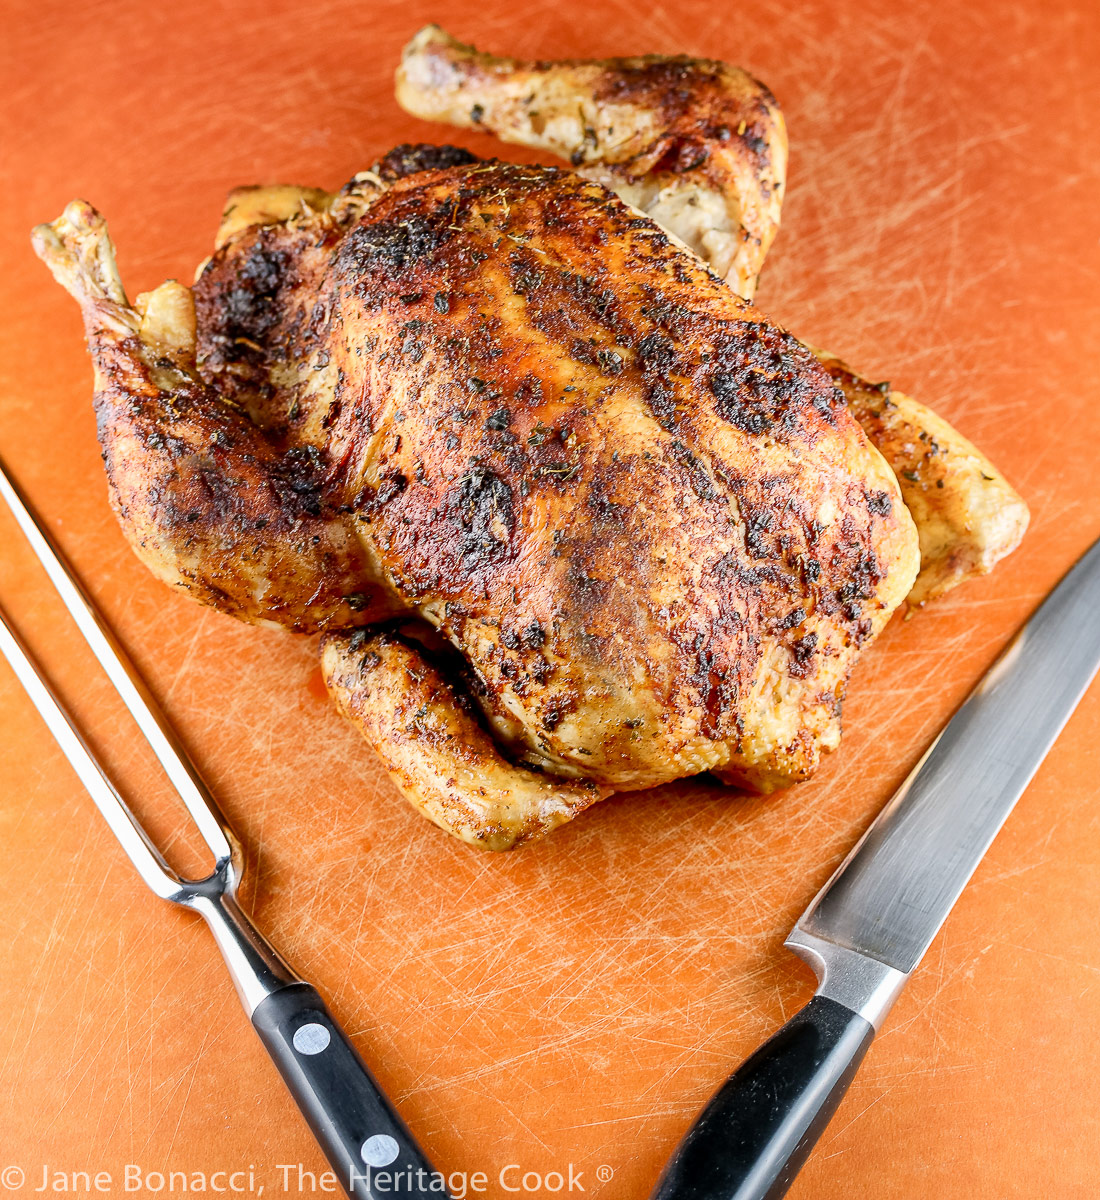 Chicken ready for carving with a large fork and knife